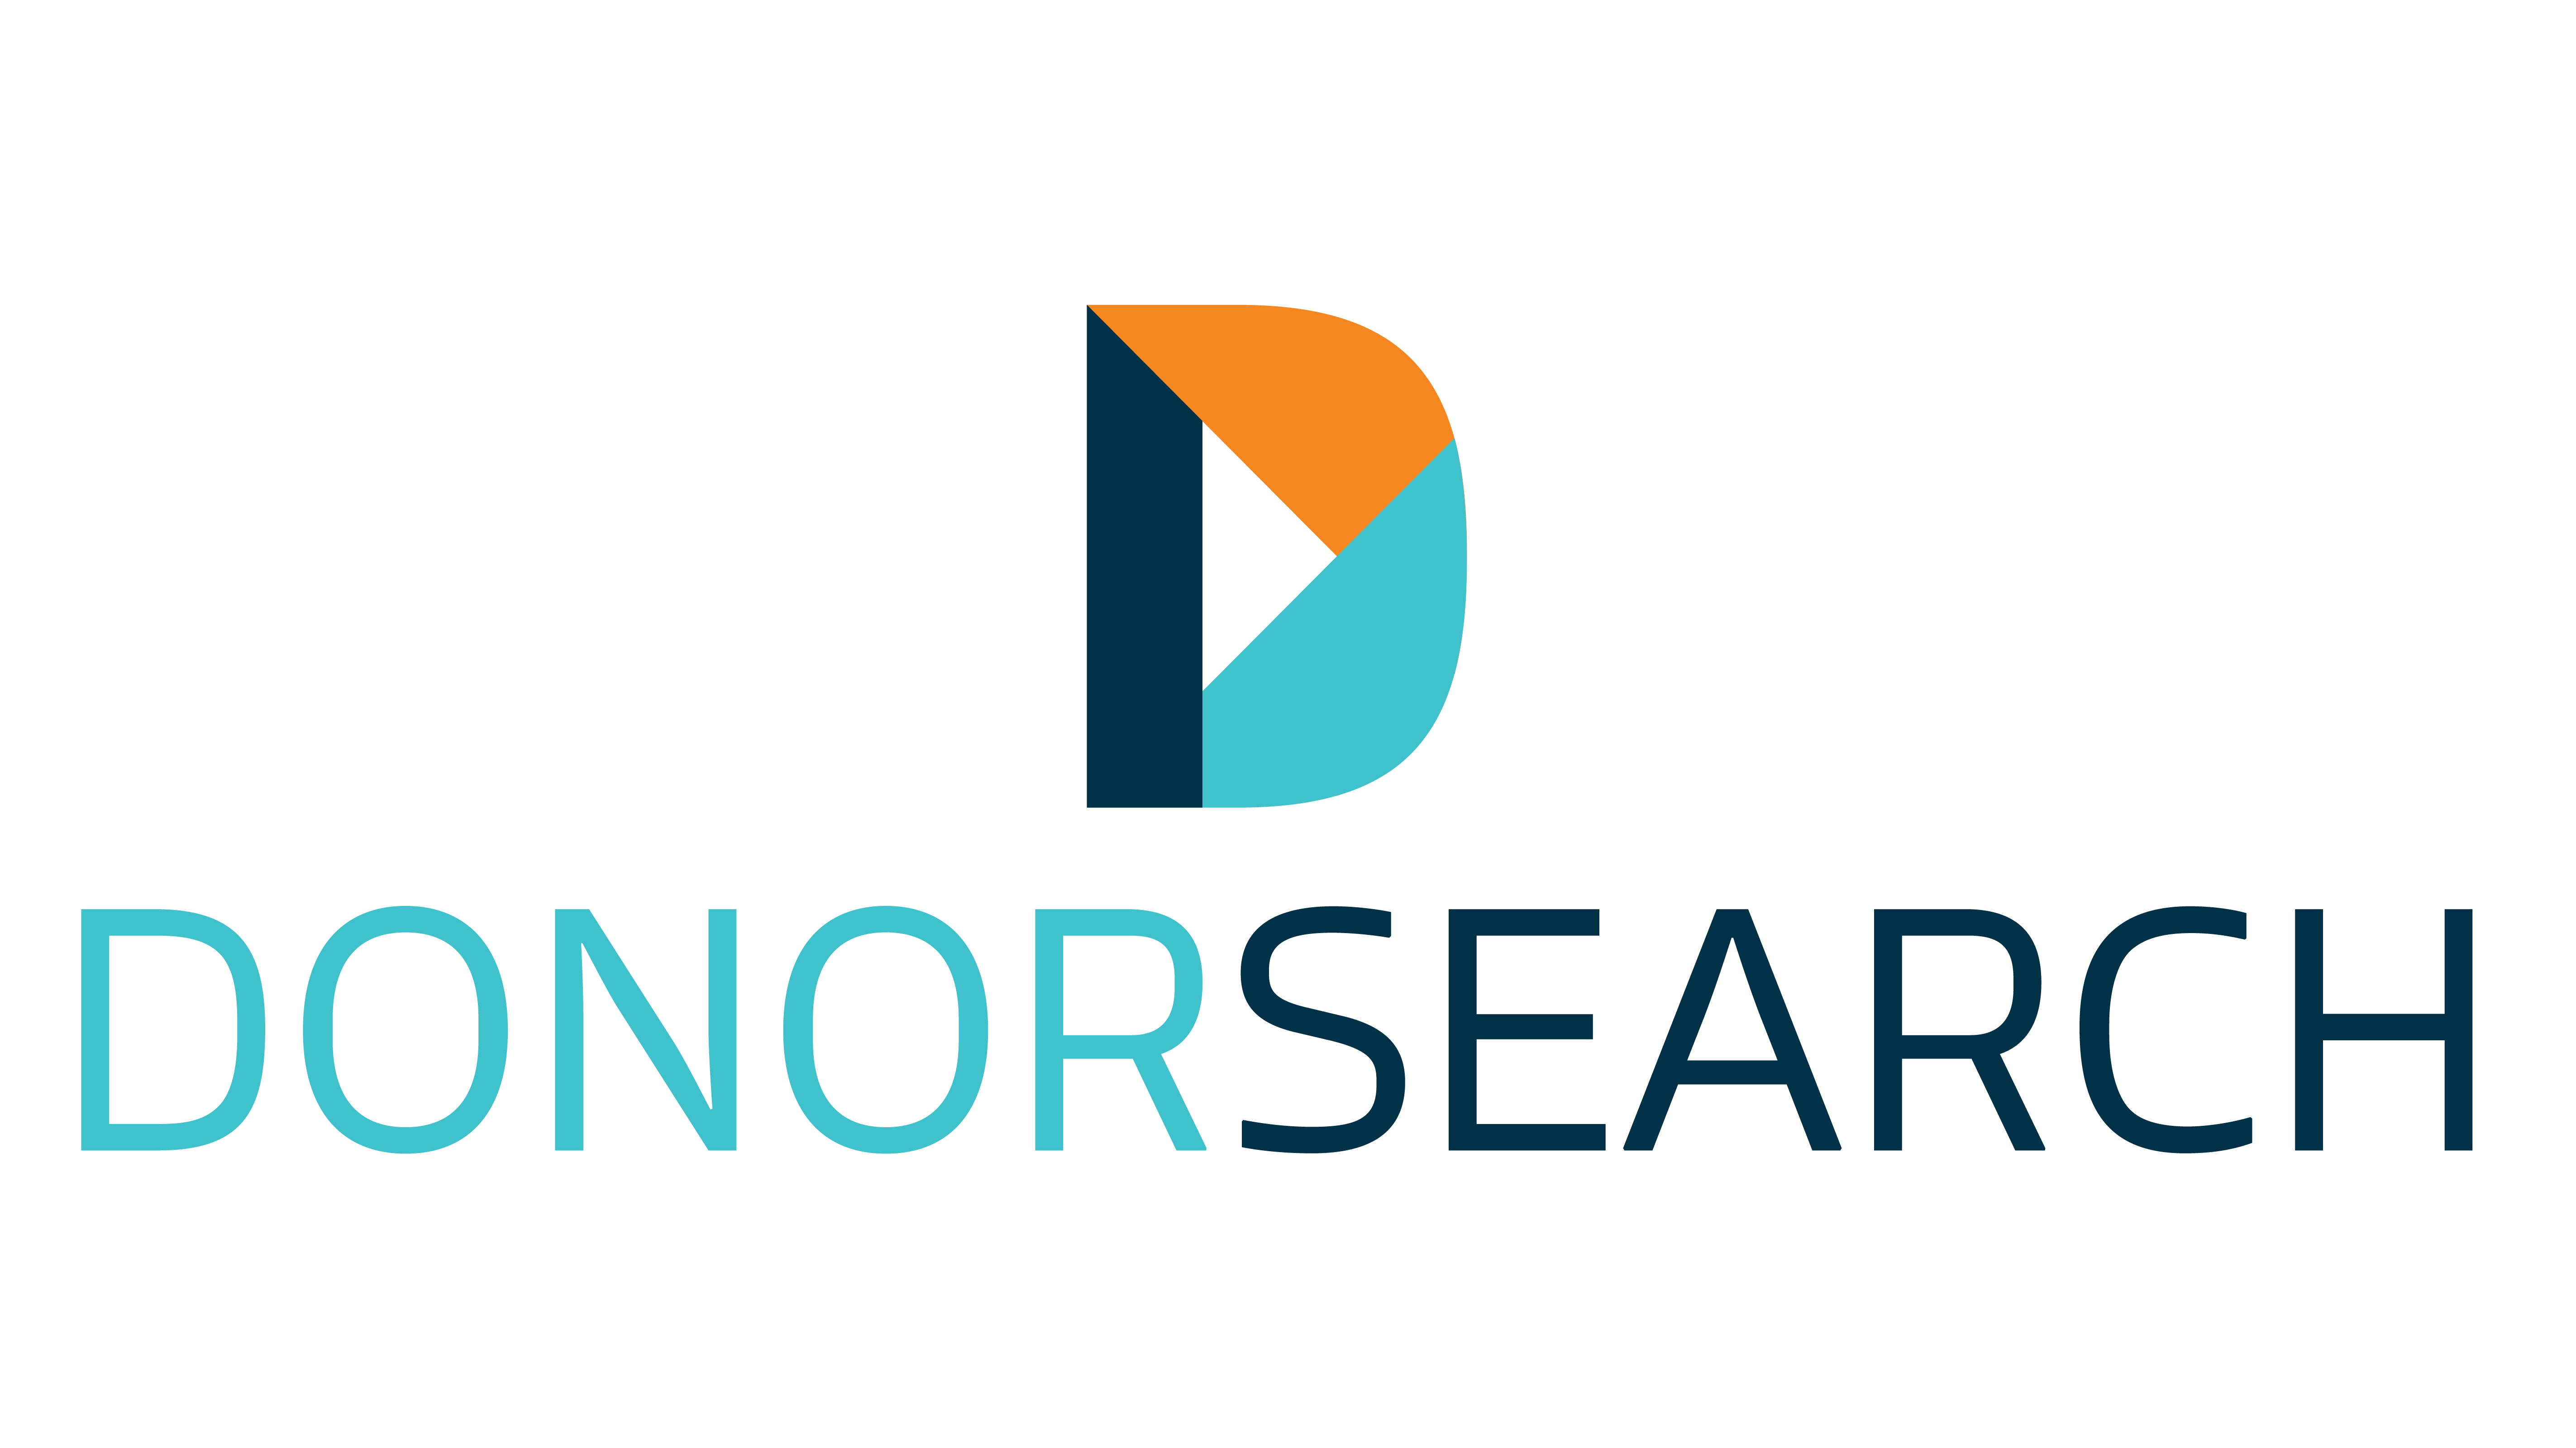 Logo of Donorsearch